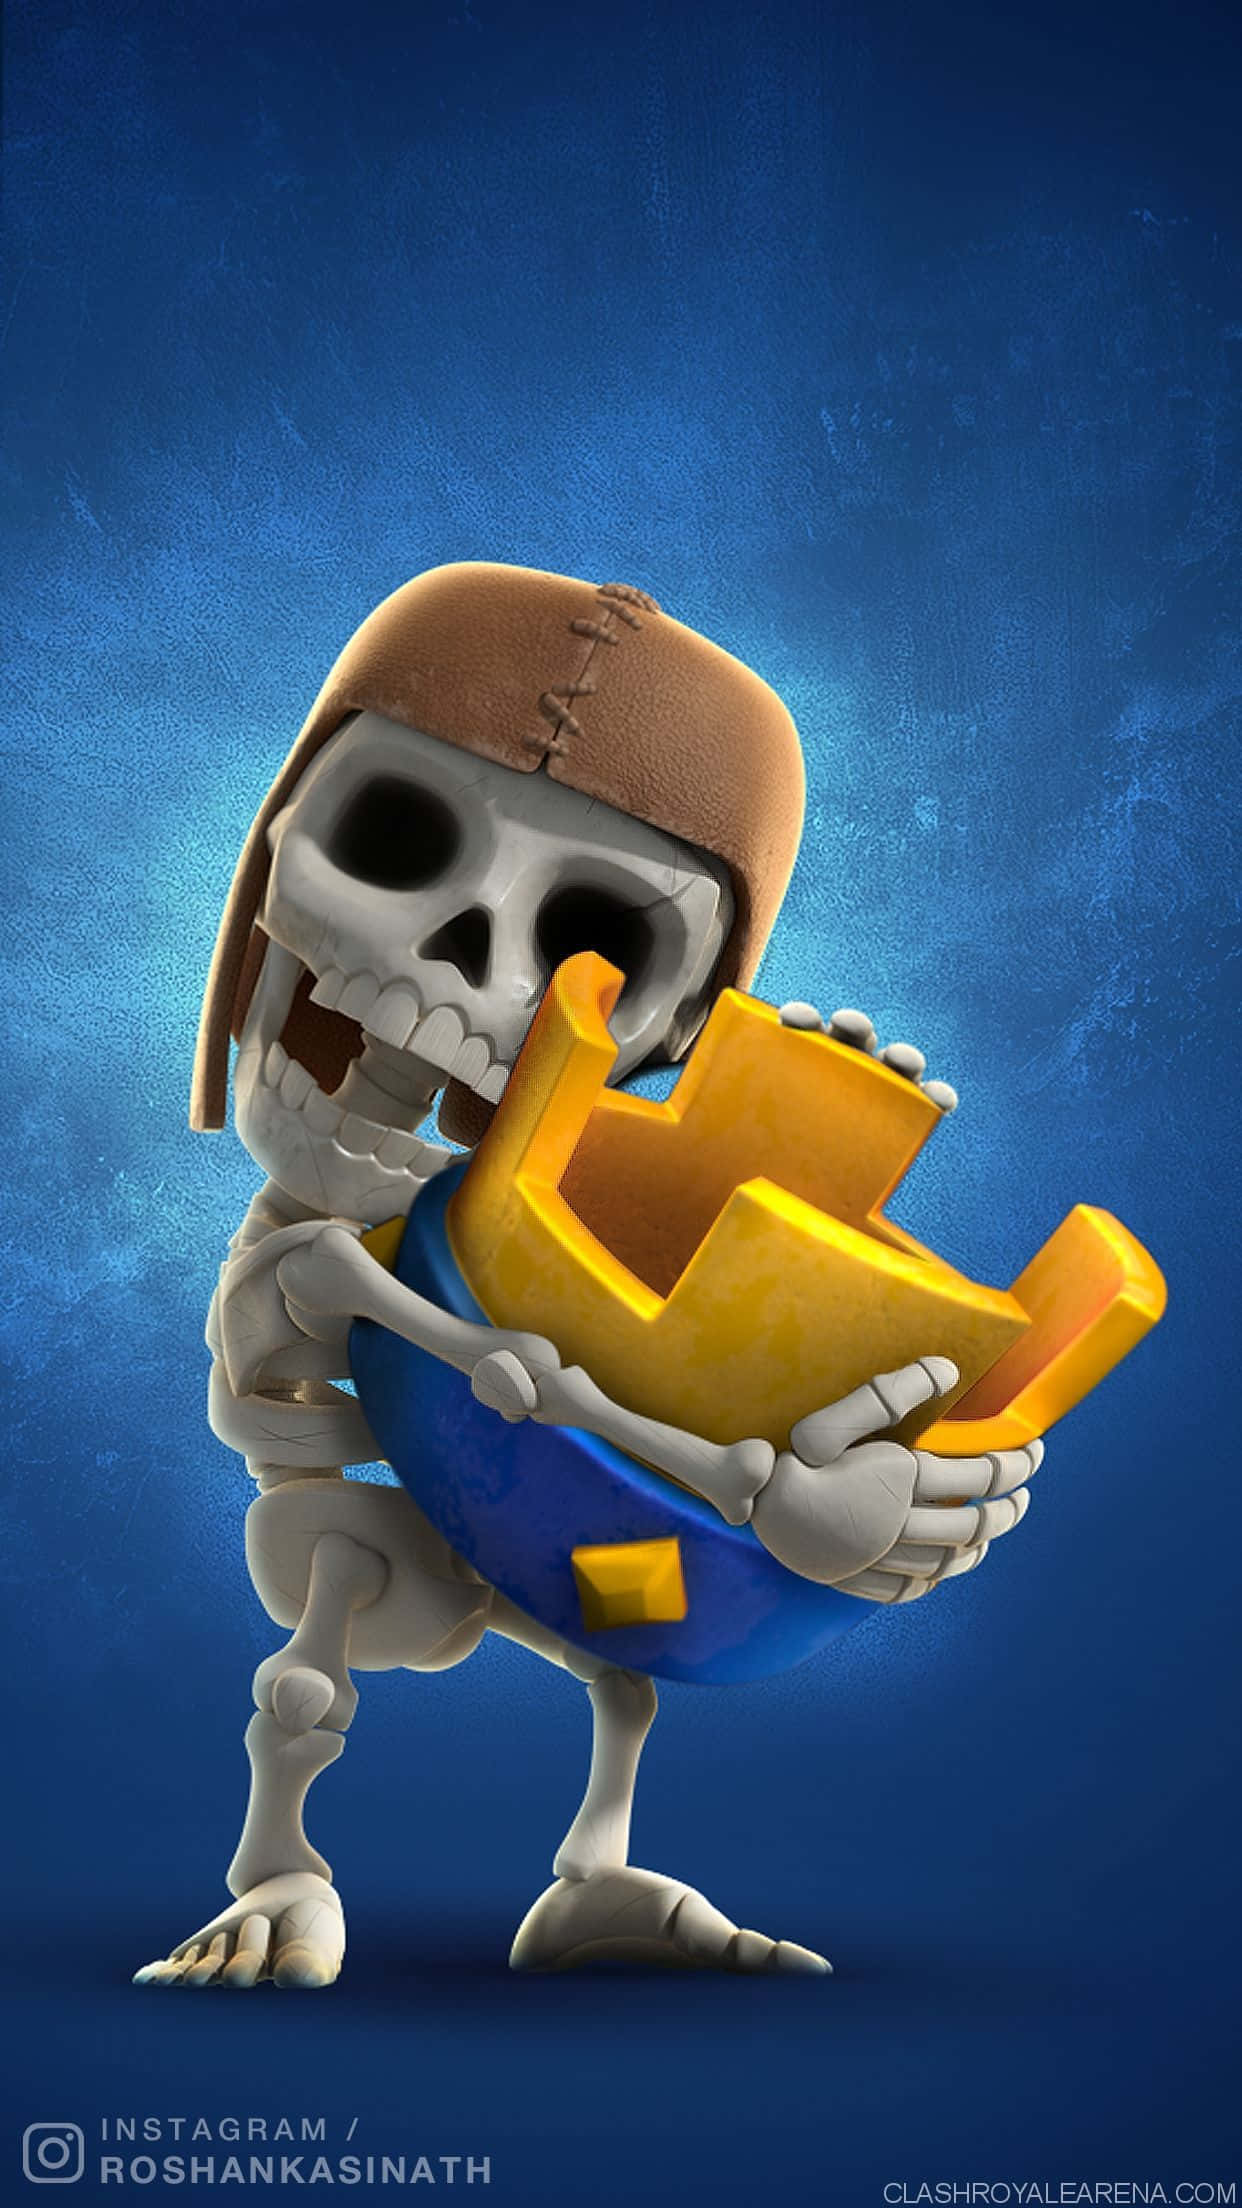 "Dive into the world of Clash Royale and dominate the Arena!"